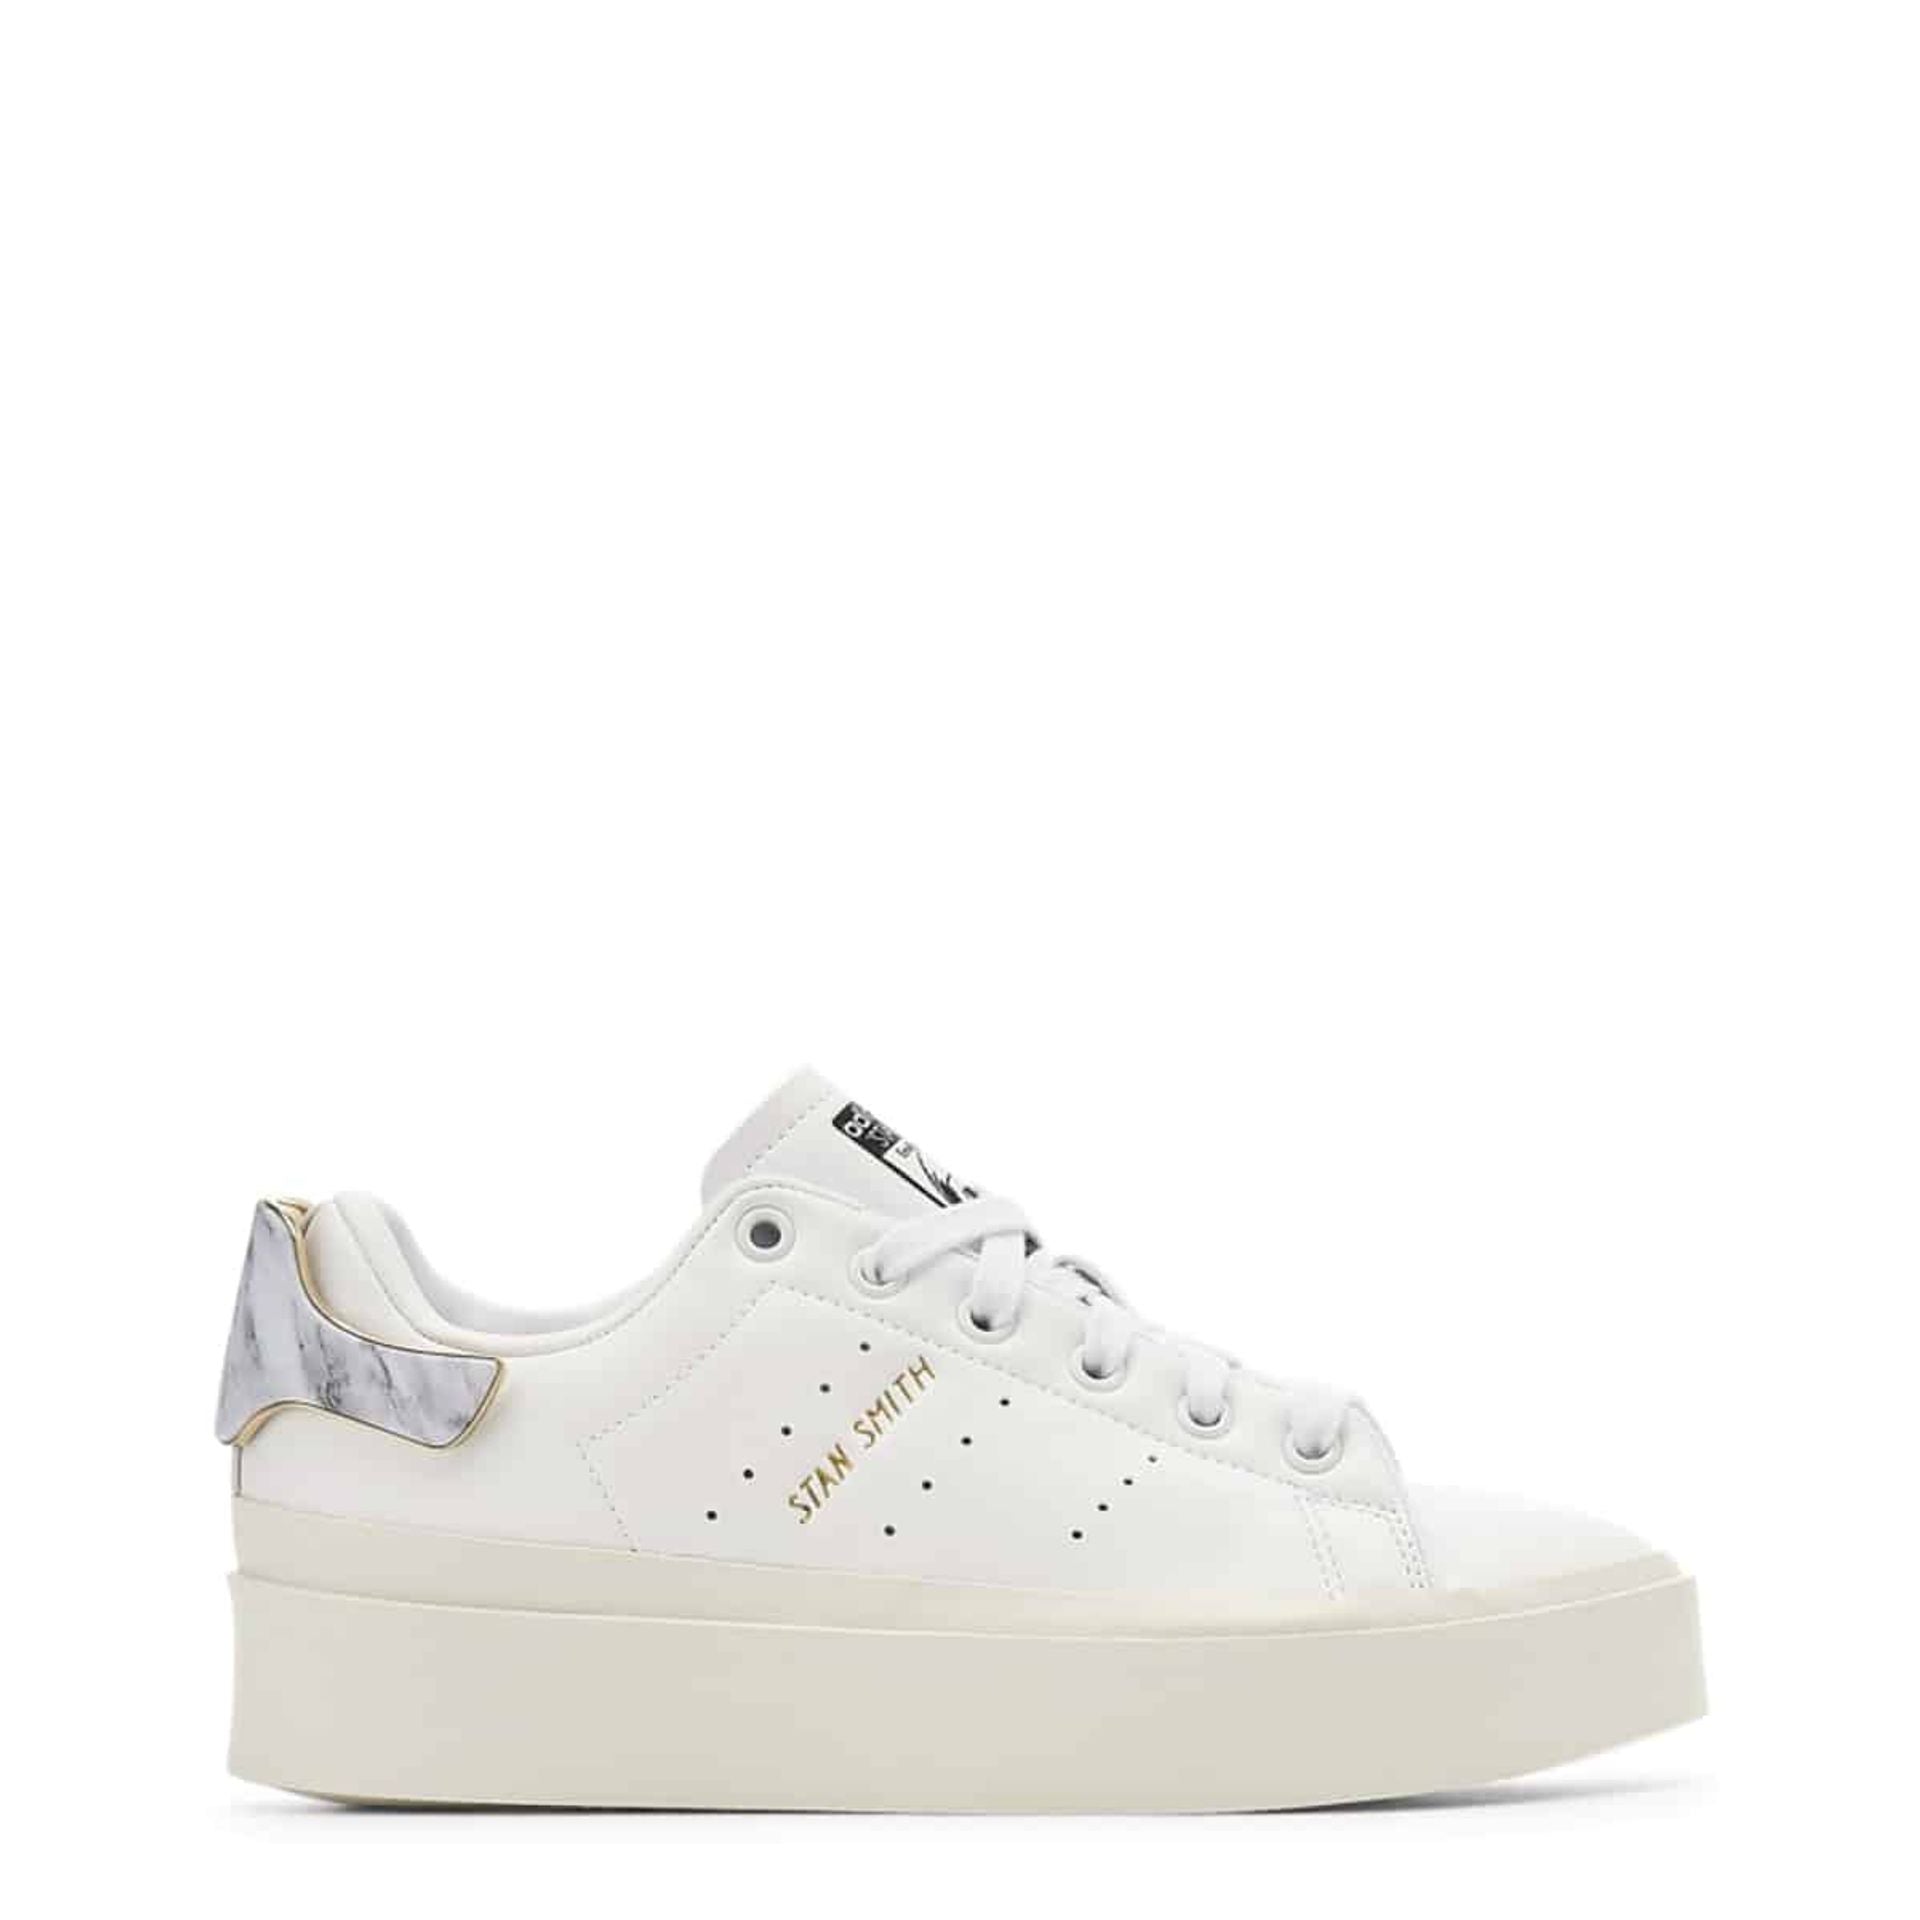 Adidas Stan Smith Low Top Sneakers White